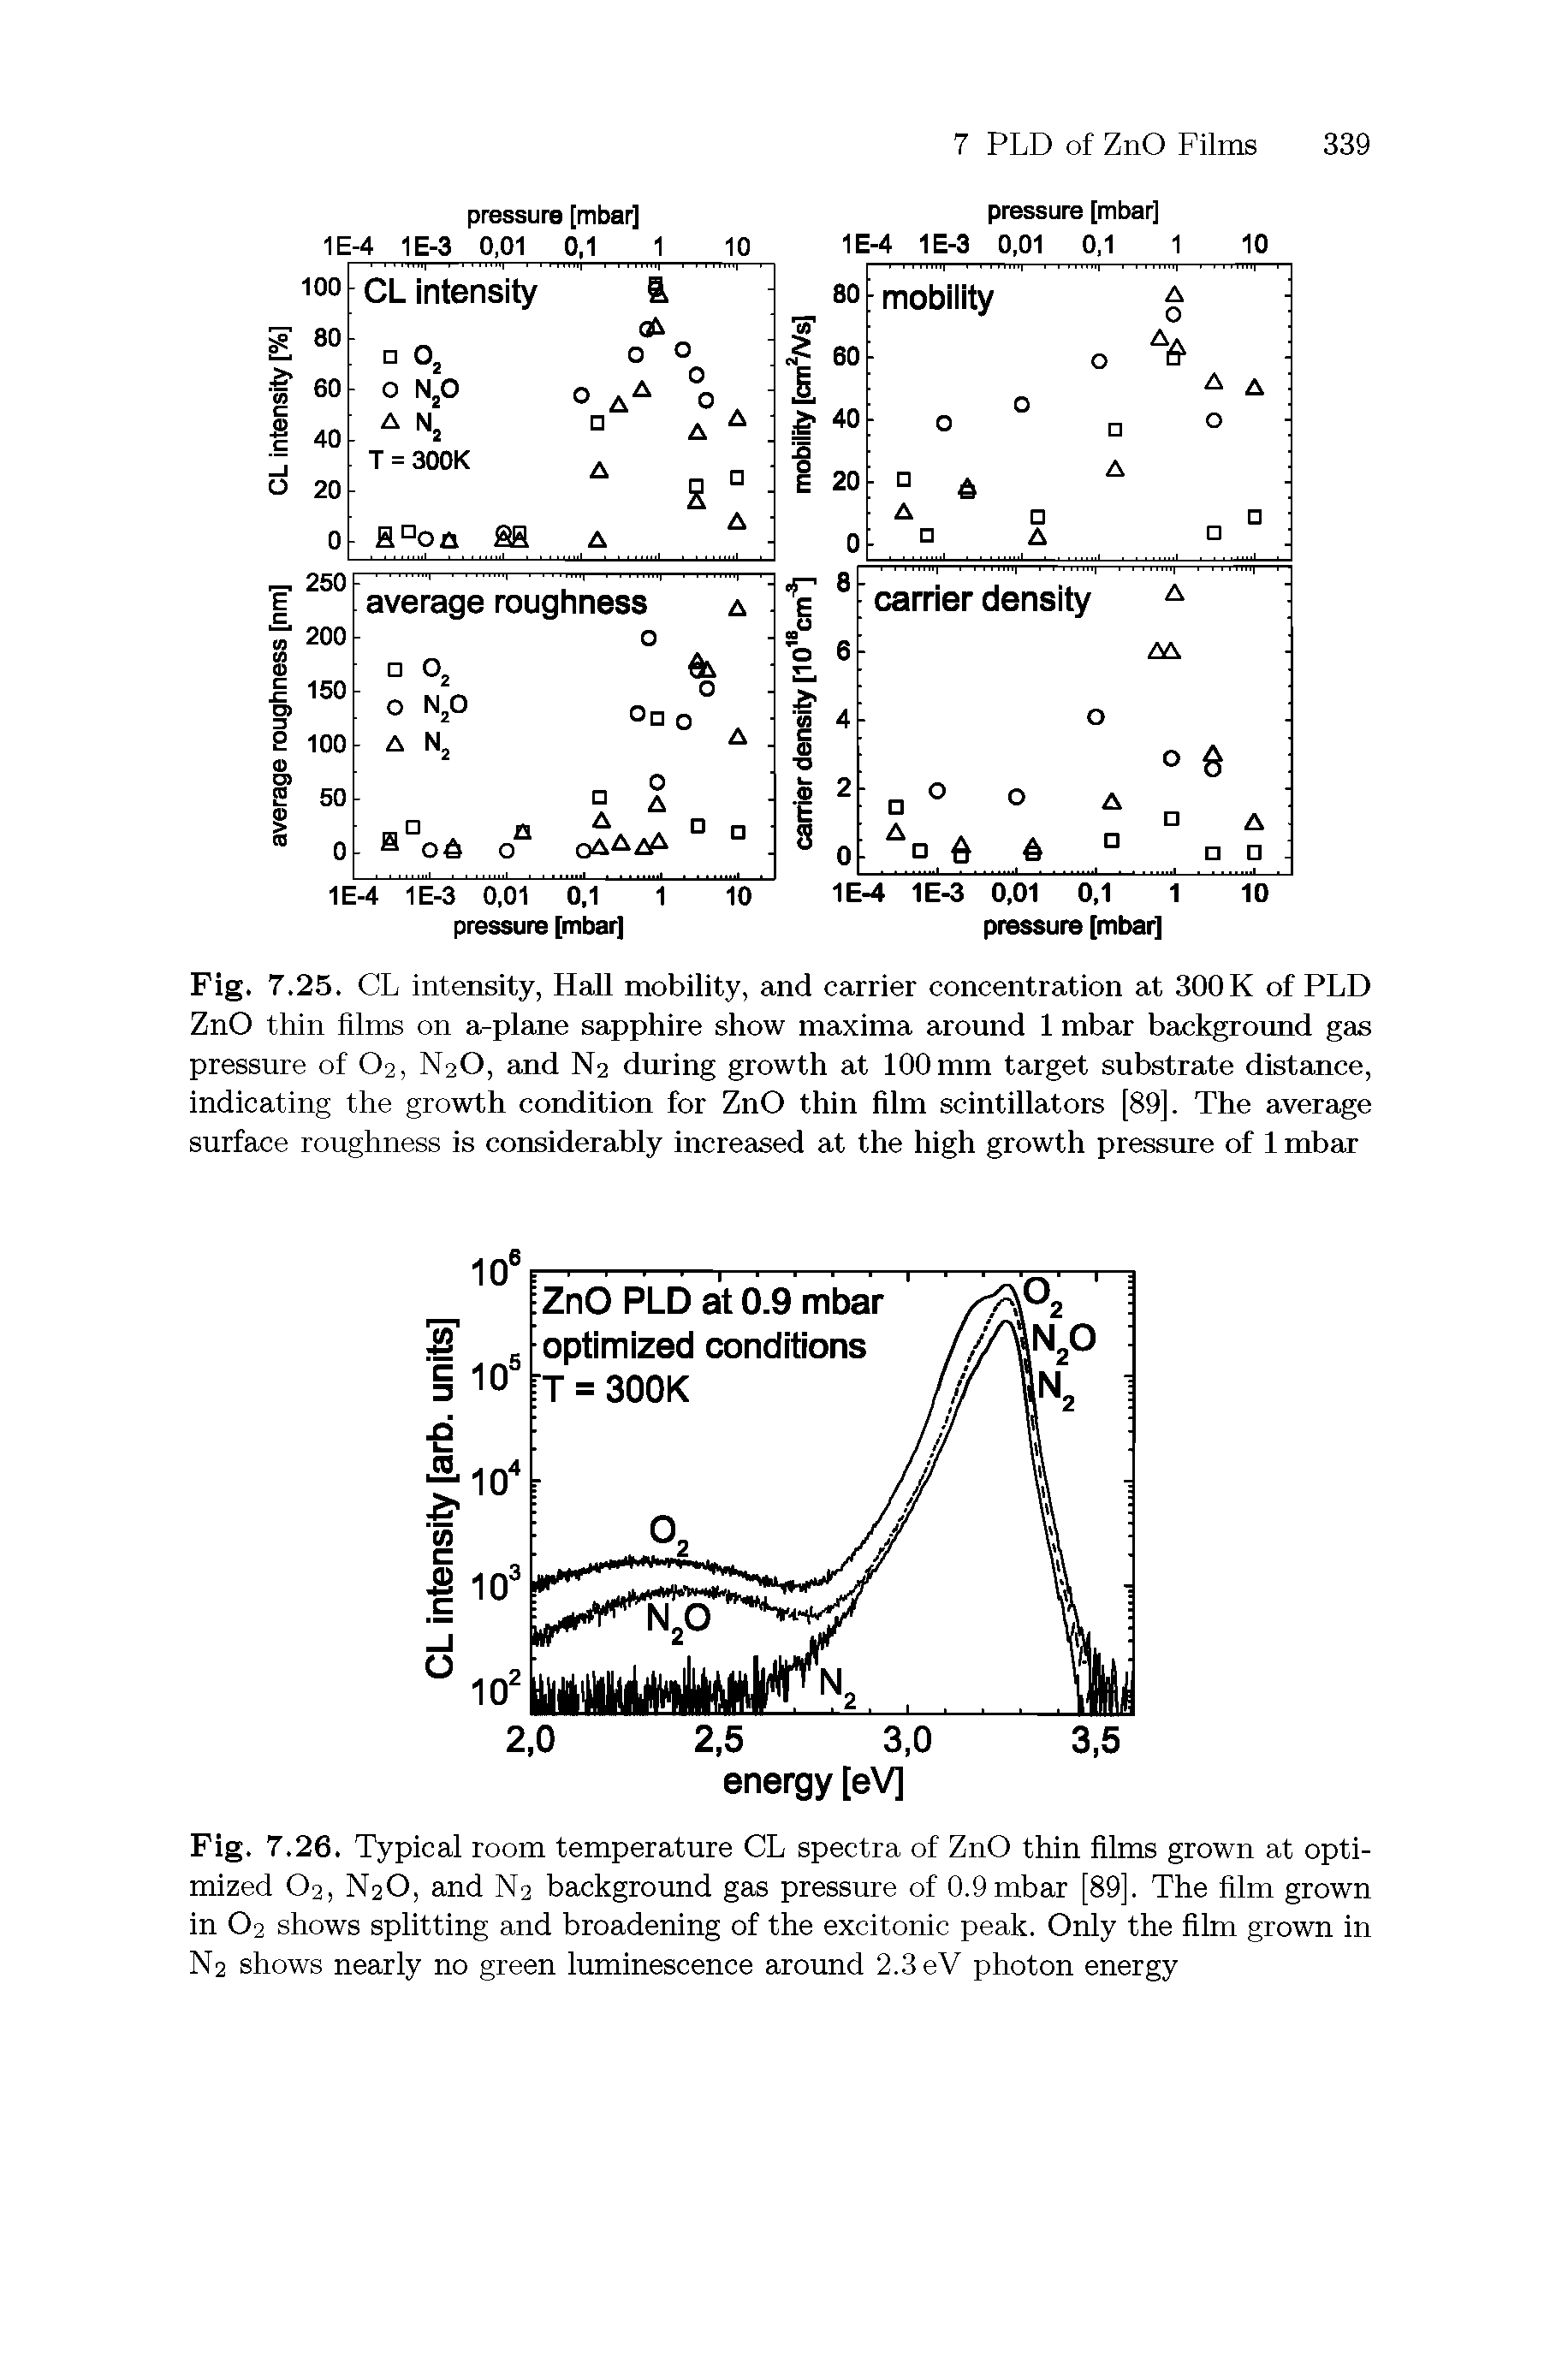 Fig. 7.25. CL intensity, Hall mobility, and carrier concentration at 300K of PLD ZnO thin films on a-plane sapphire show maxima around 1 mbar background gas pressure of O2, N2O, and N2 during growth at 100 mm target substrate distance, indicating the growth condition for ZnO thin film scintillators [89]. The average surface roughness is considerably increased at the high growth pressure of 1 mbar...